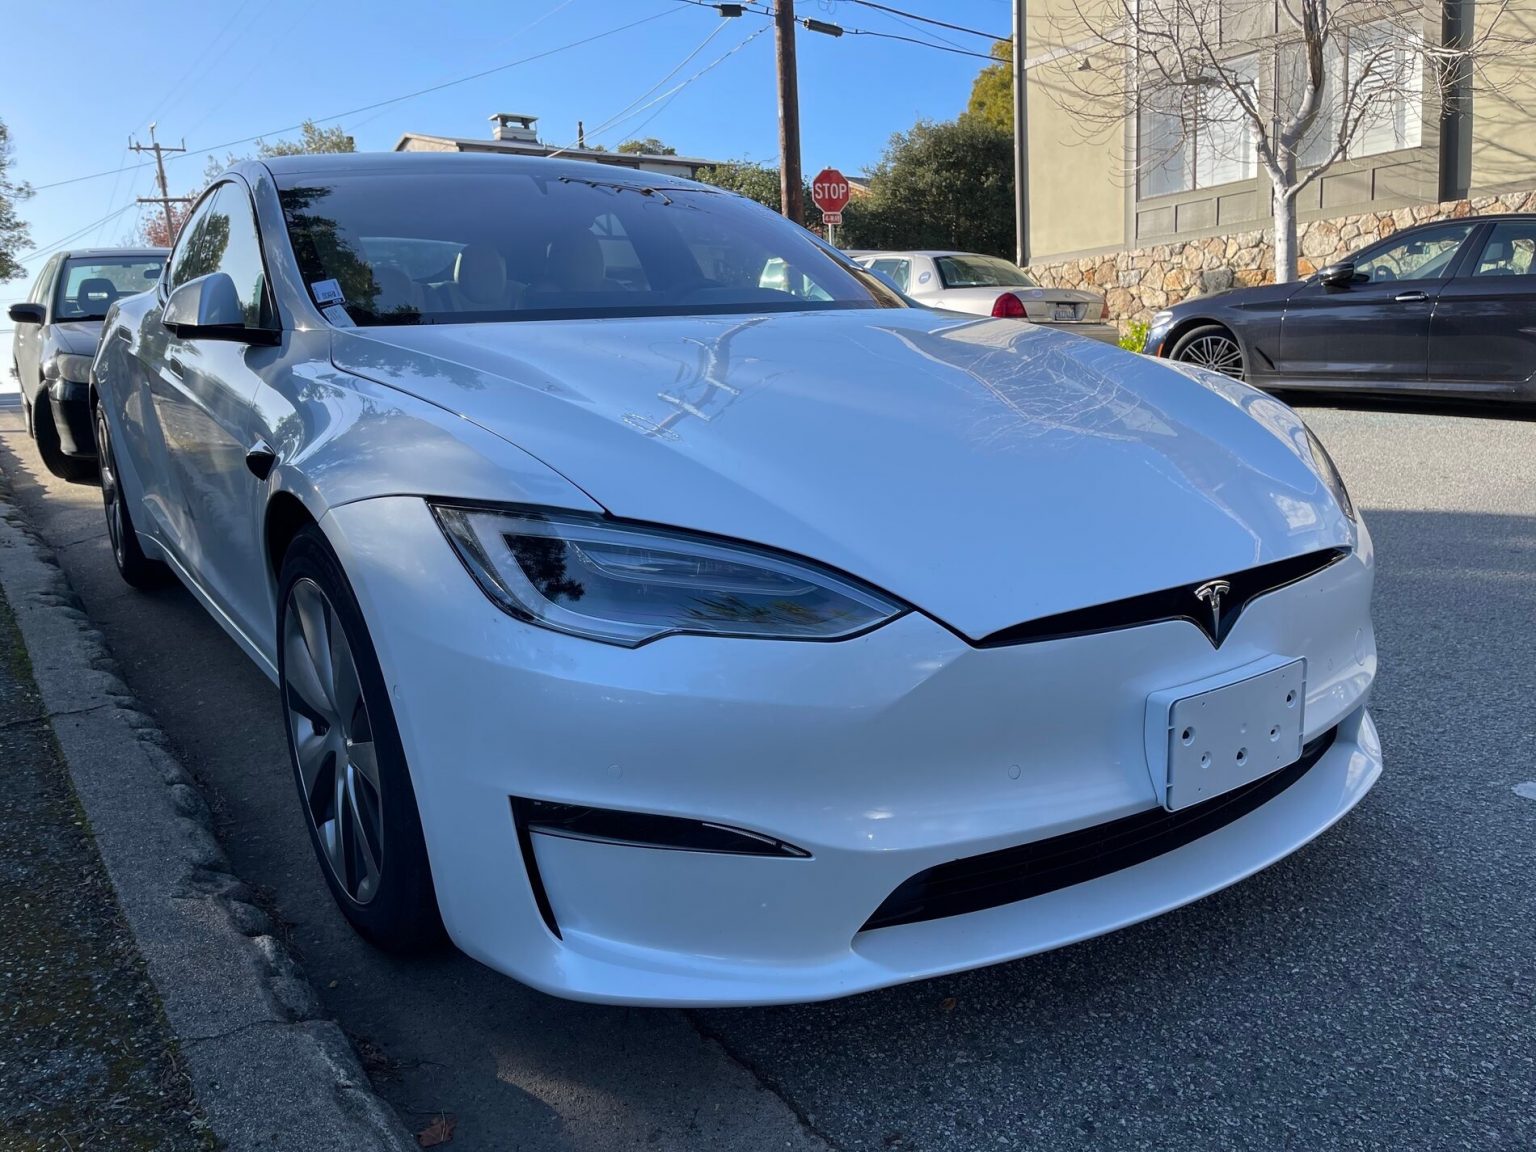 Detailed Comparison Between The Old And New Tesla Model 3 Headlights